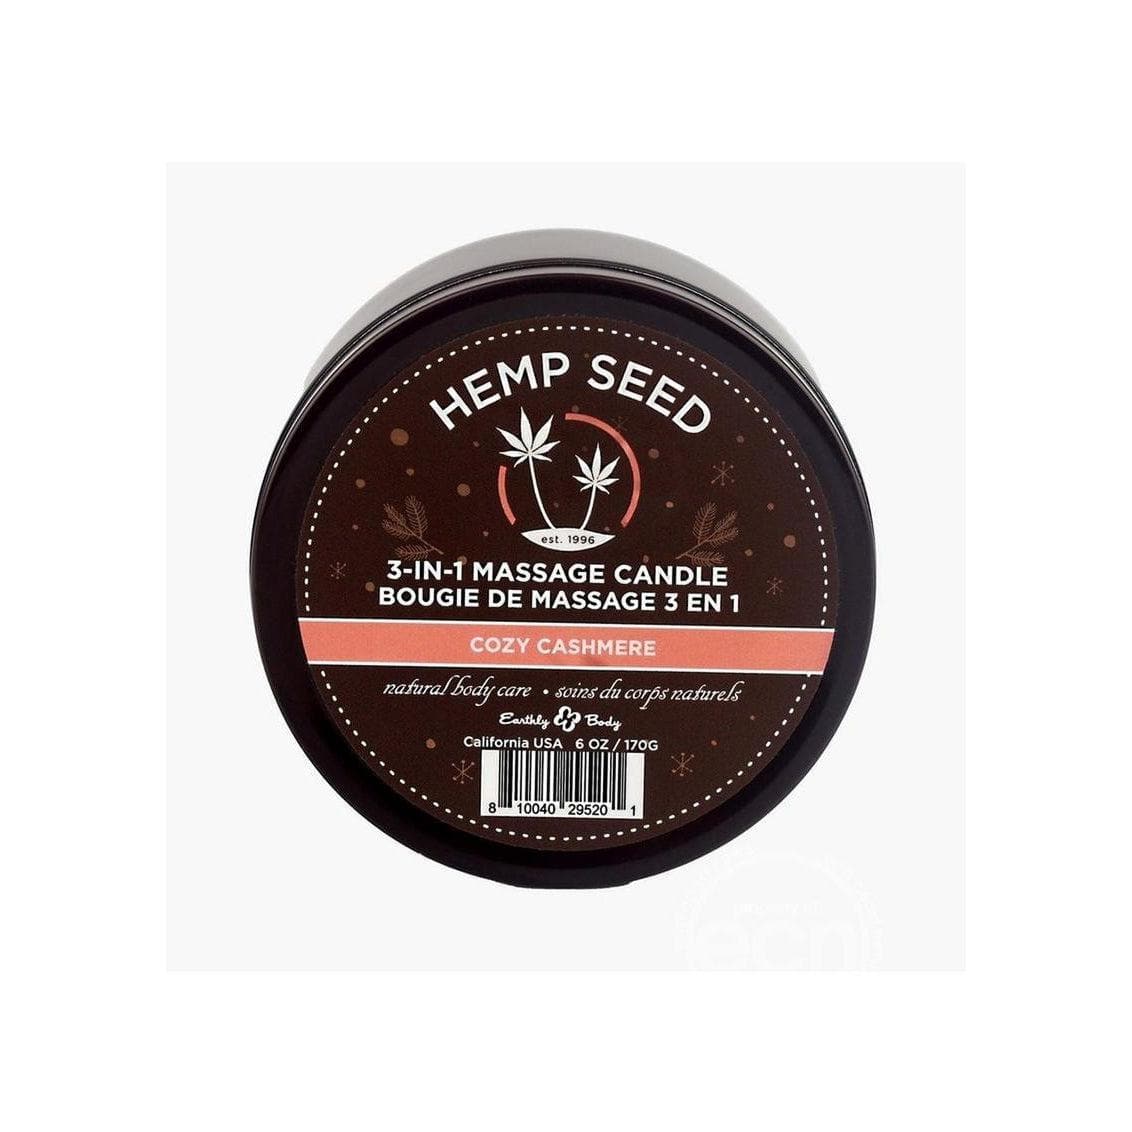 Earthly Body Hemp Seed 3 In 1 Massage Candle Cozy Cashmere 6 oz - Romantic Blessings